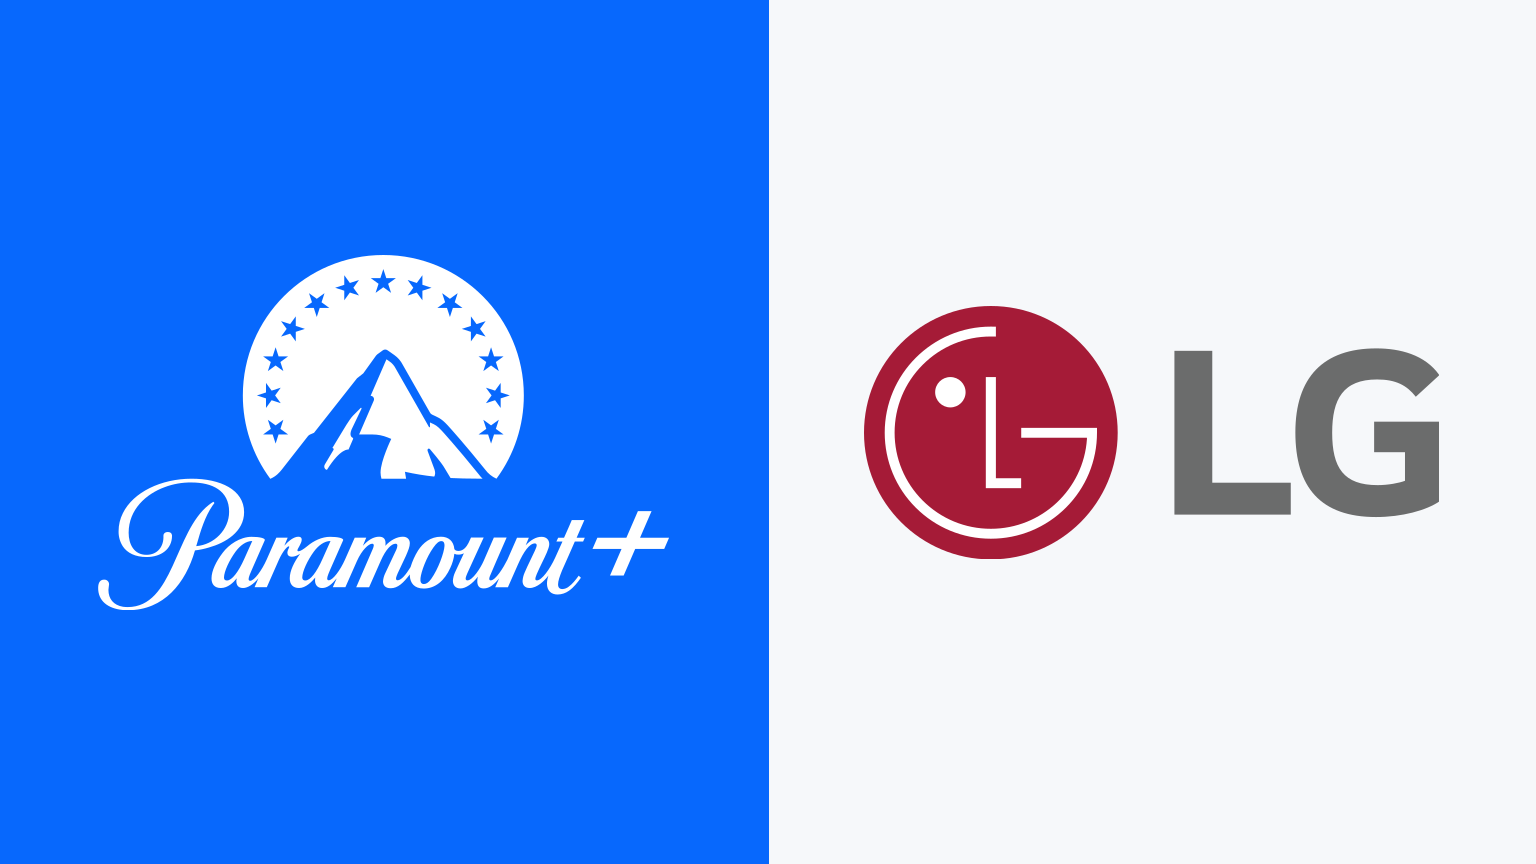 How To Add Paramount Plus On LG Smart TV